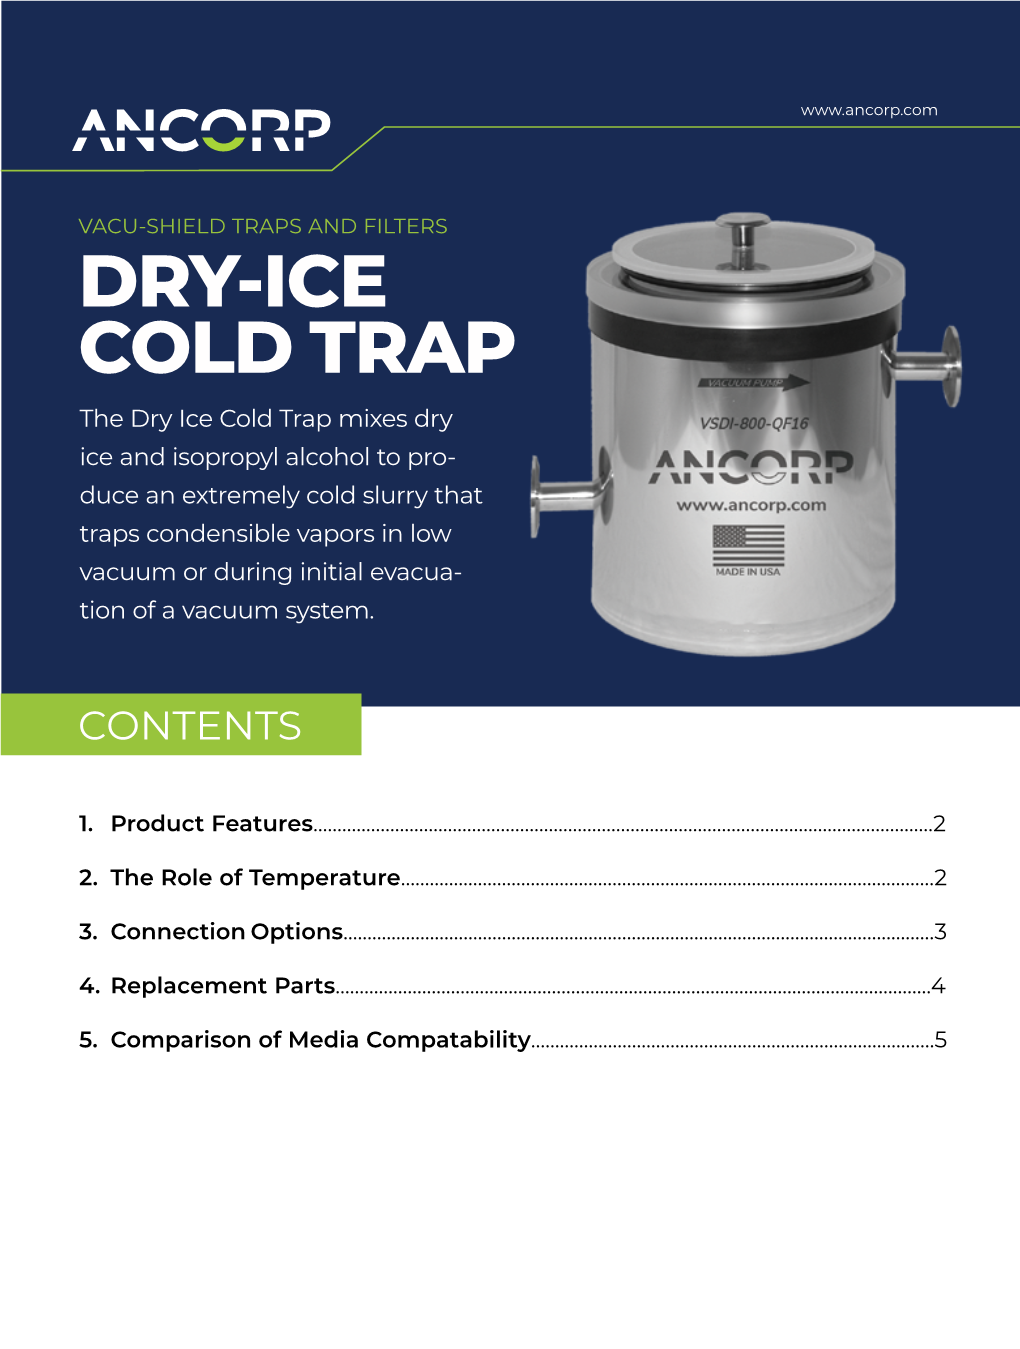 Dry-Ice Cold Trap